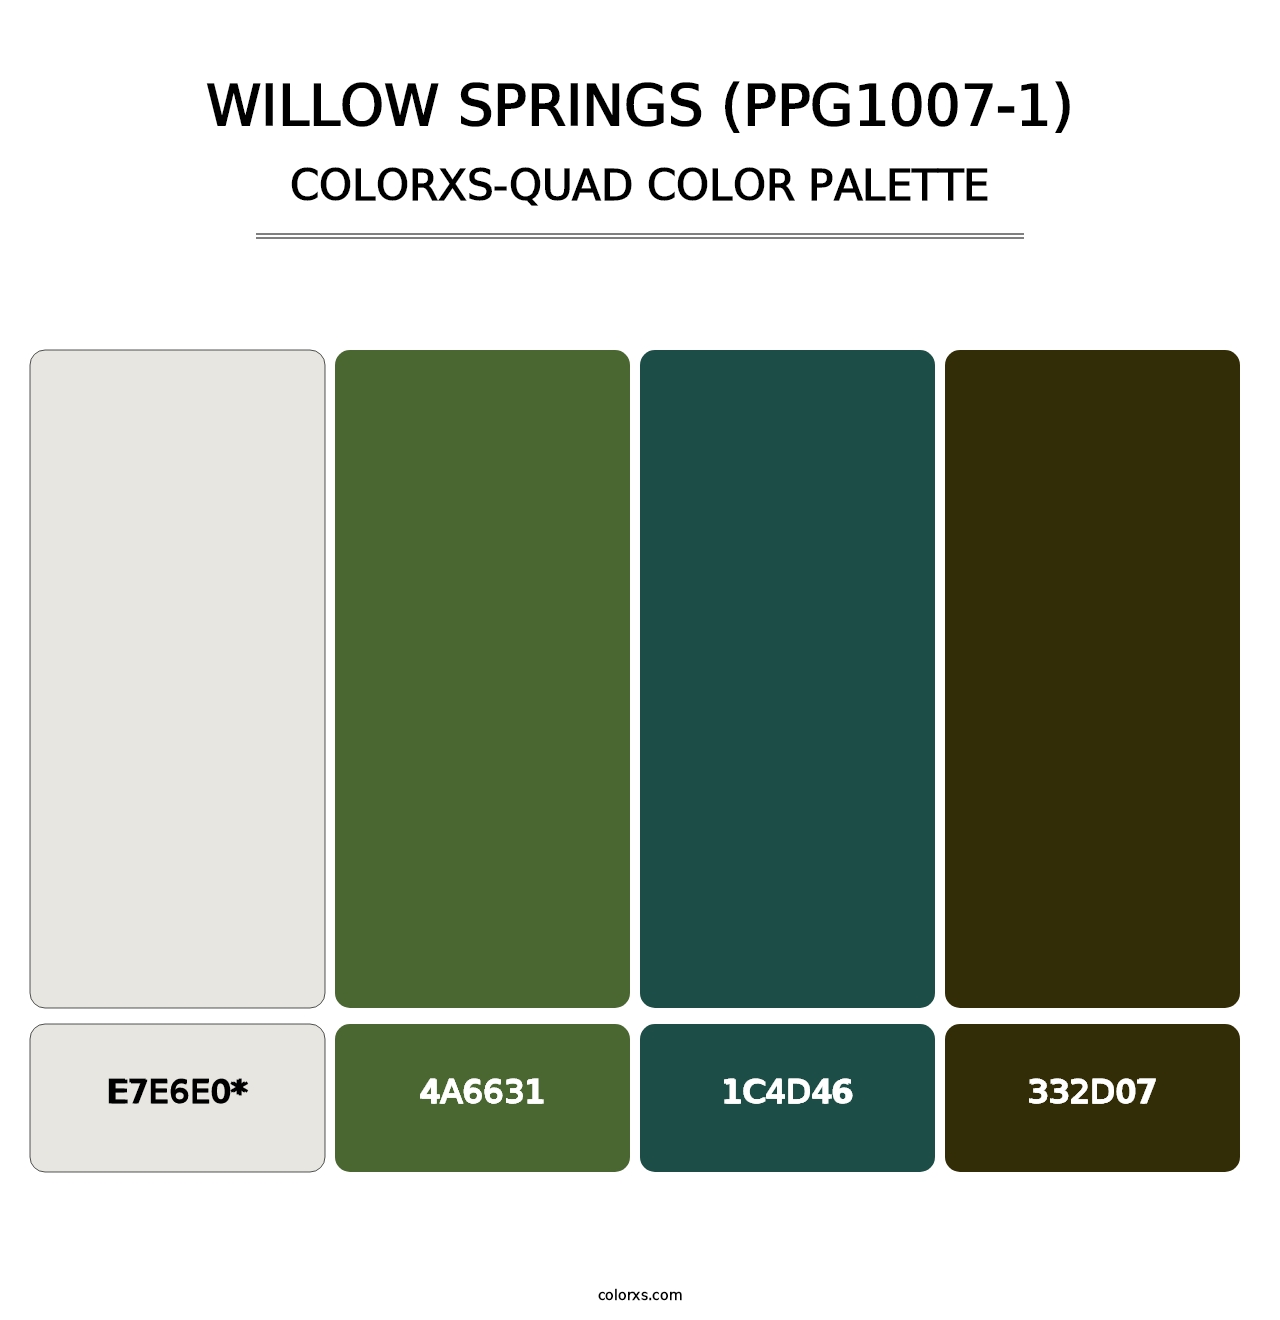 Willow Springs (PPG1007-1) - Colorxs Quad Palette